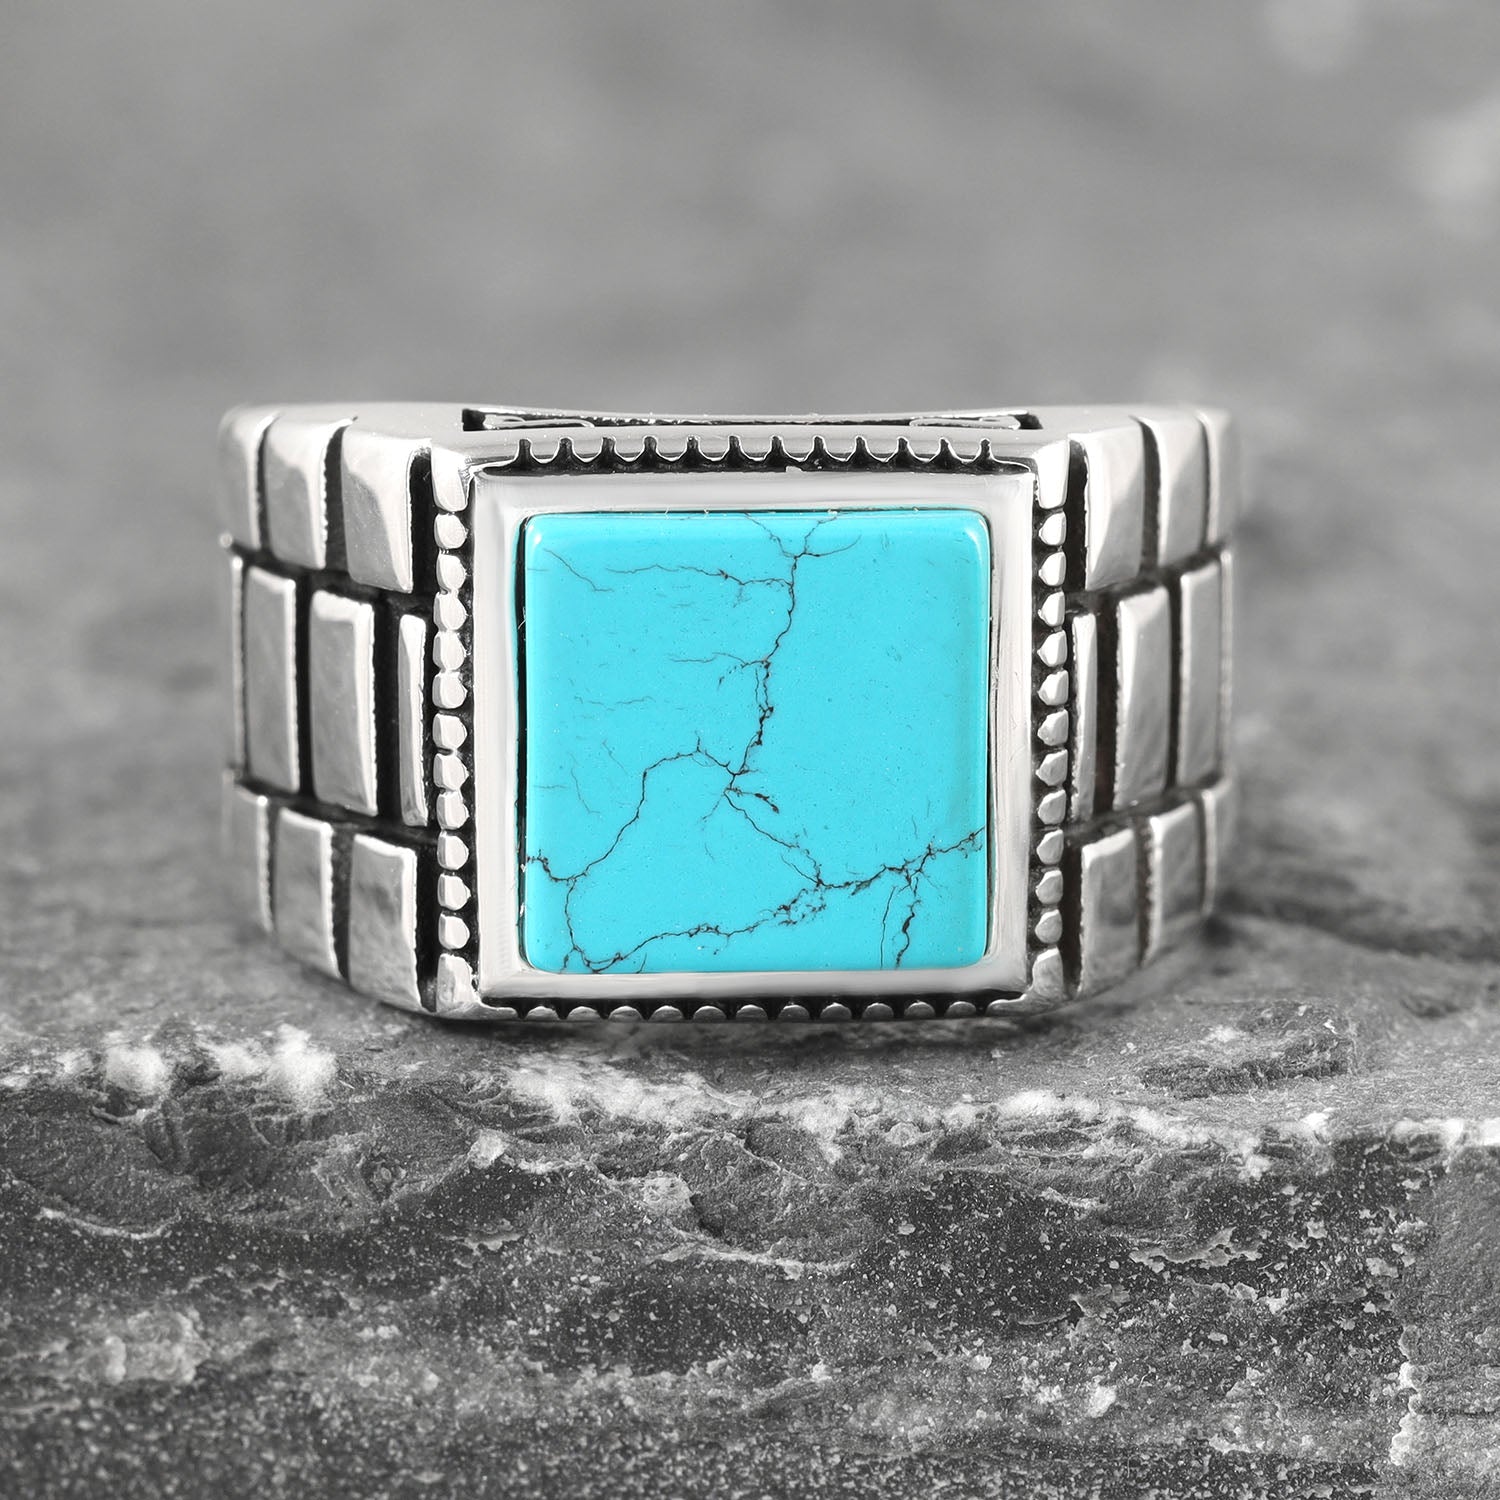 Chimoda Sterling Silver Rings for Men with Turquoise - Chimoda